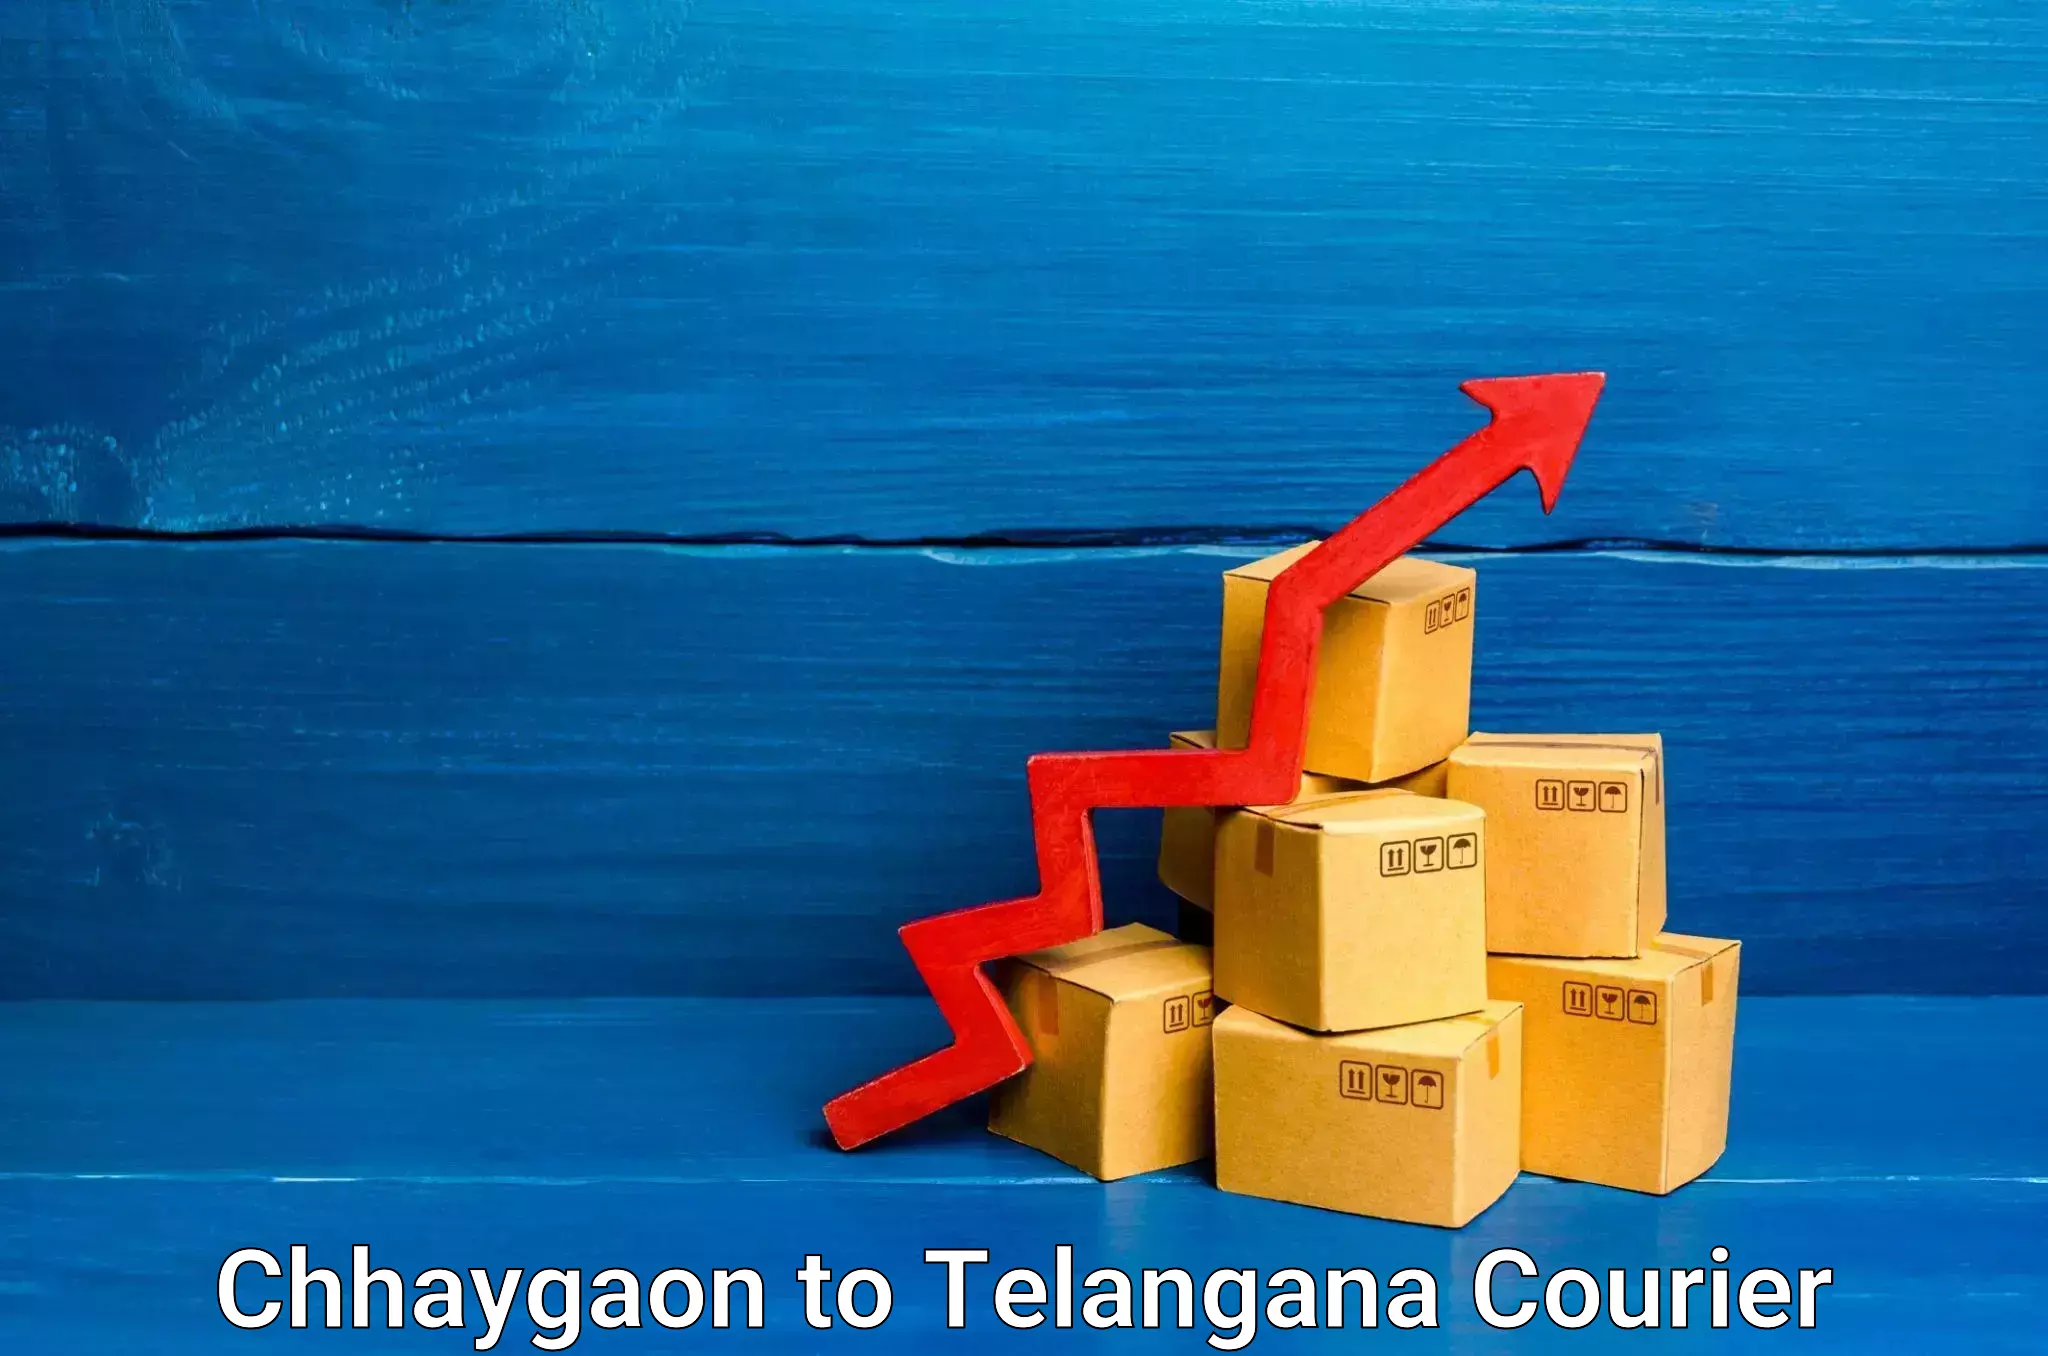 Cargo delivery service Chhaygaon to Telangana